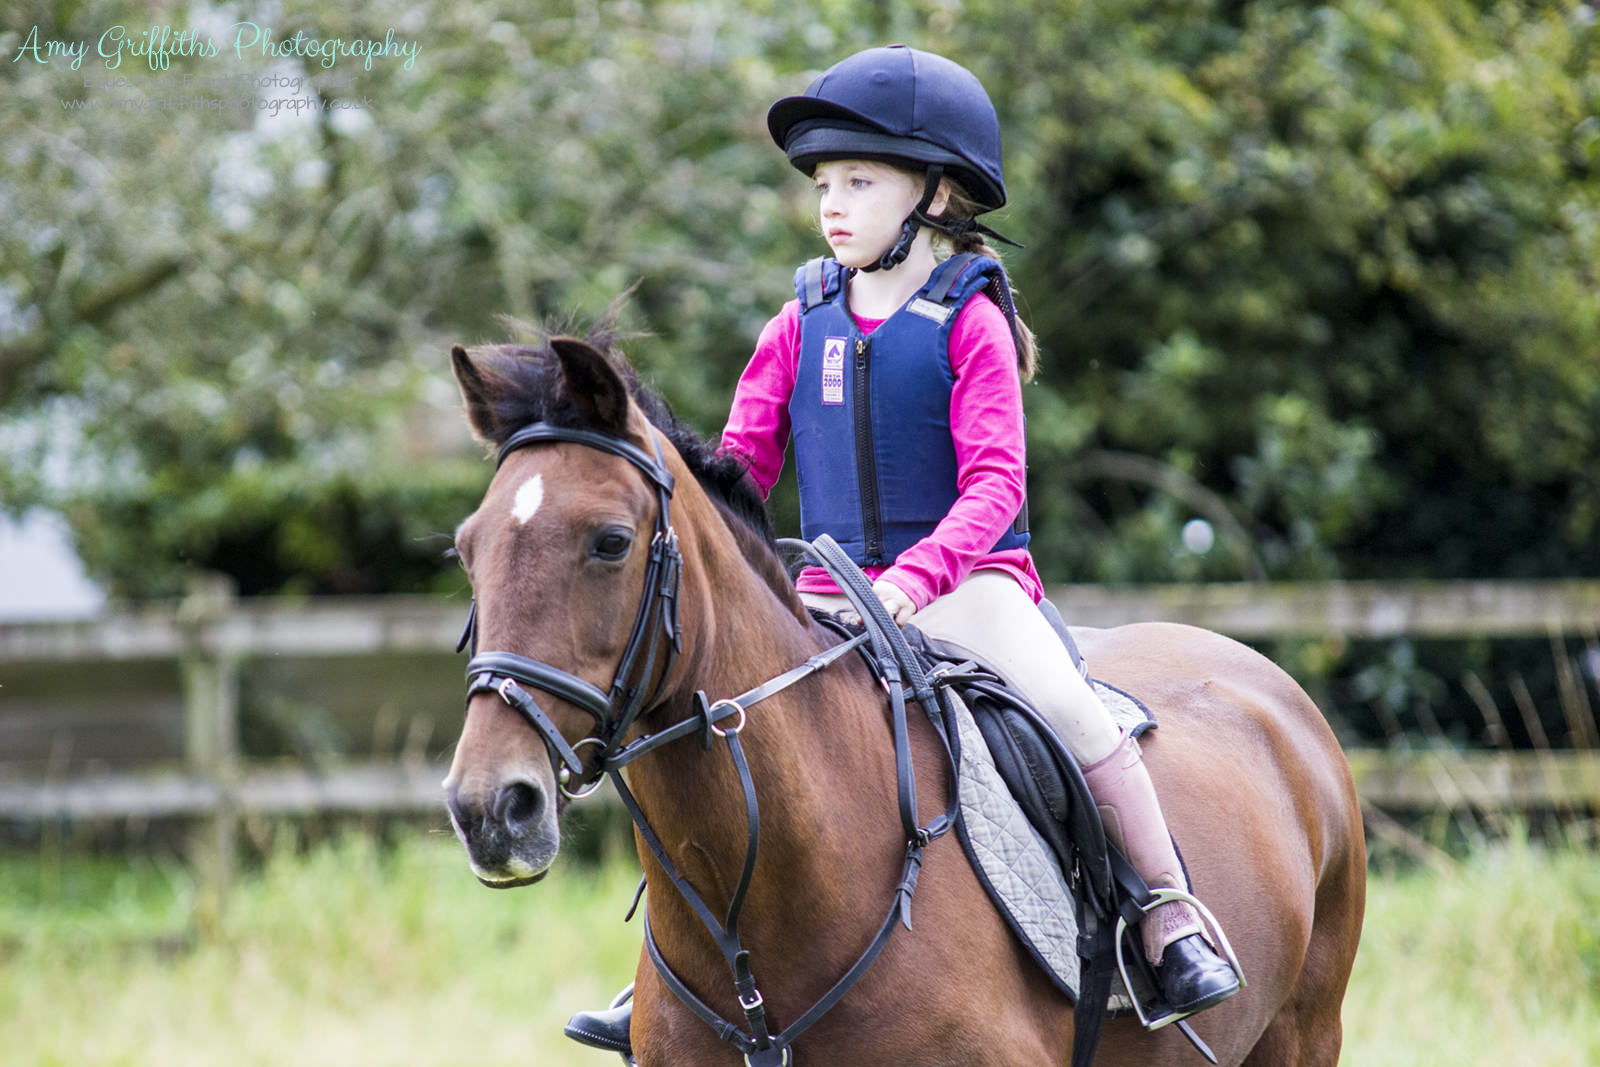 Showjumping at Kildarra Events - Amy Griffiths Event Photography